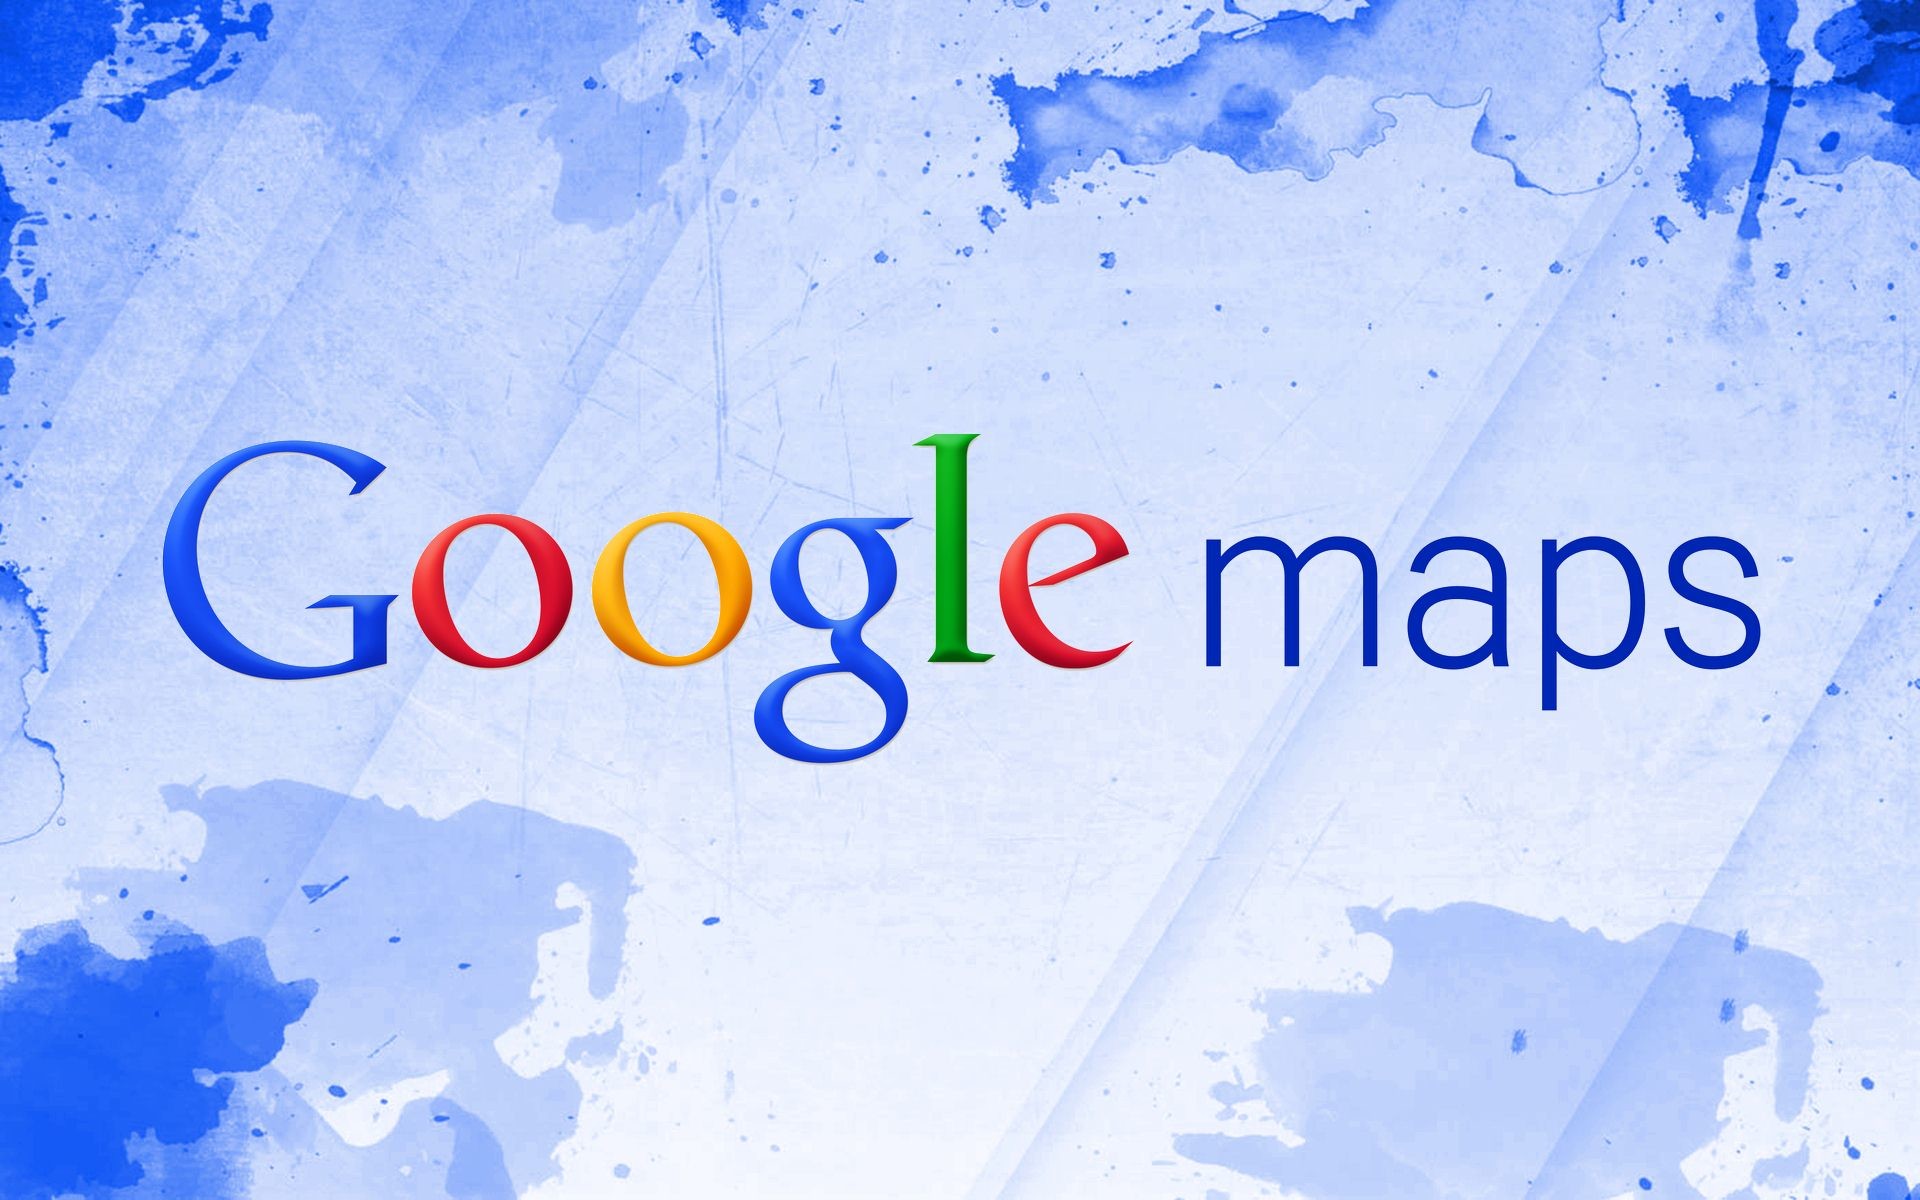 1920x1200 google maps logo wallpaper backgrounds cool images background wallpapers  smart phones samsung phone wallpapers widescreen 1080p display digital  photos ...